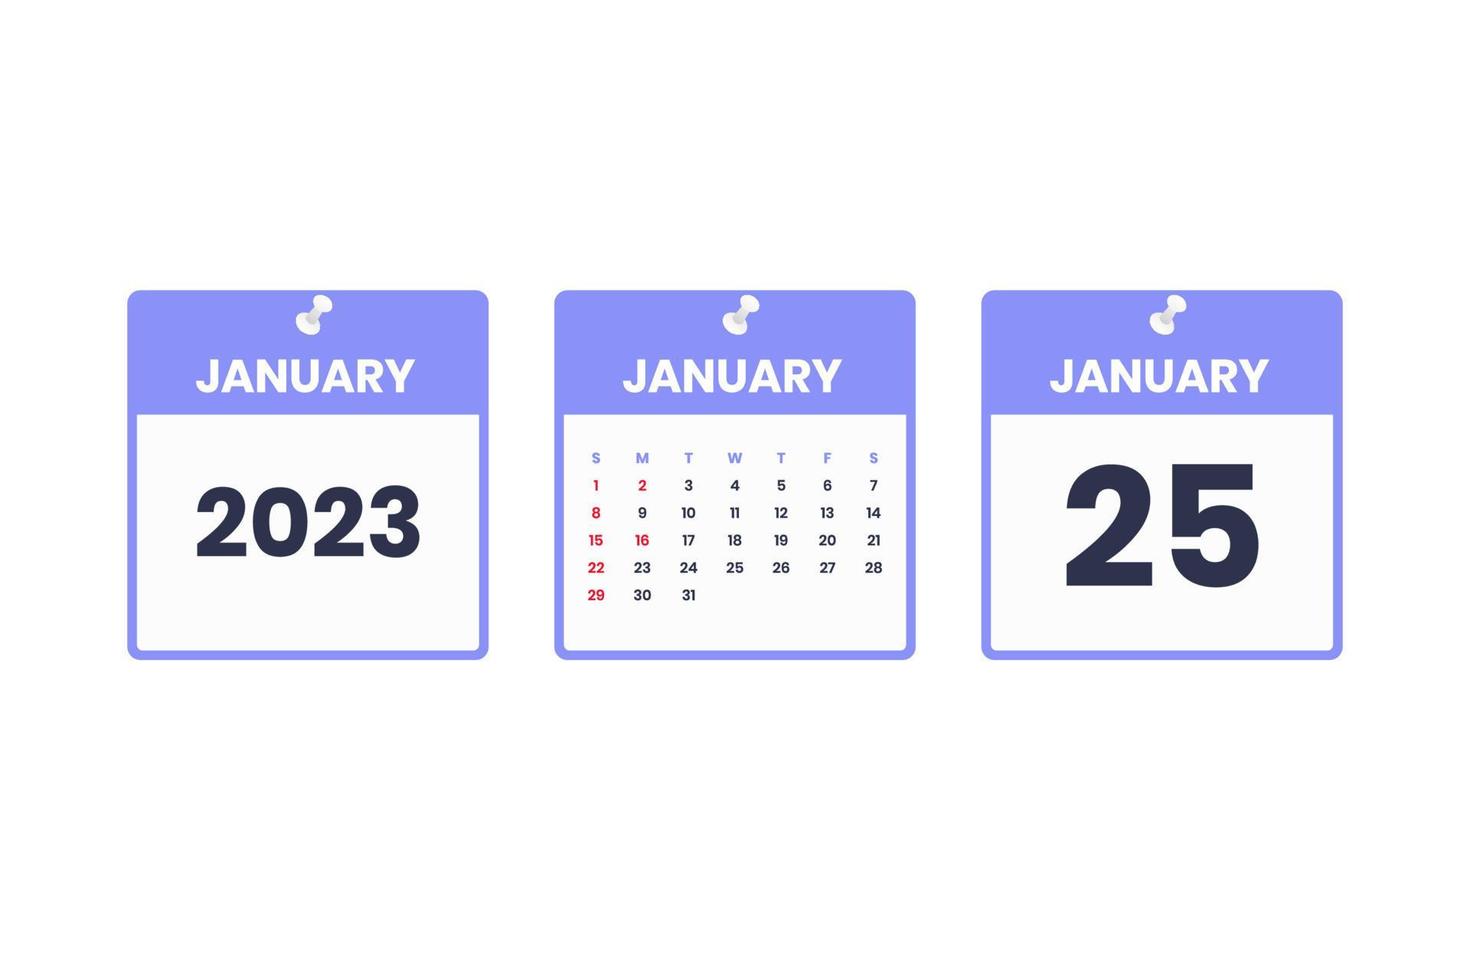 January calendar design. January 25 2023 calendar icon for schedule, appointment, important date concept vector